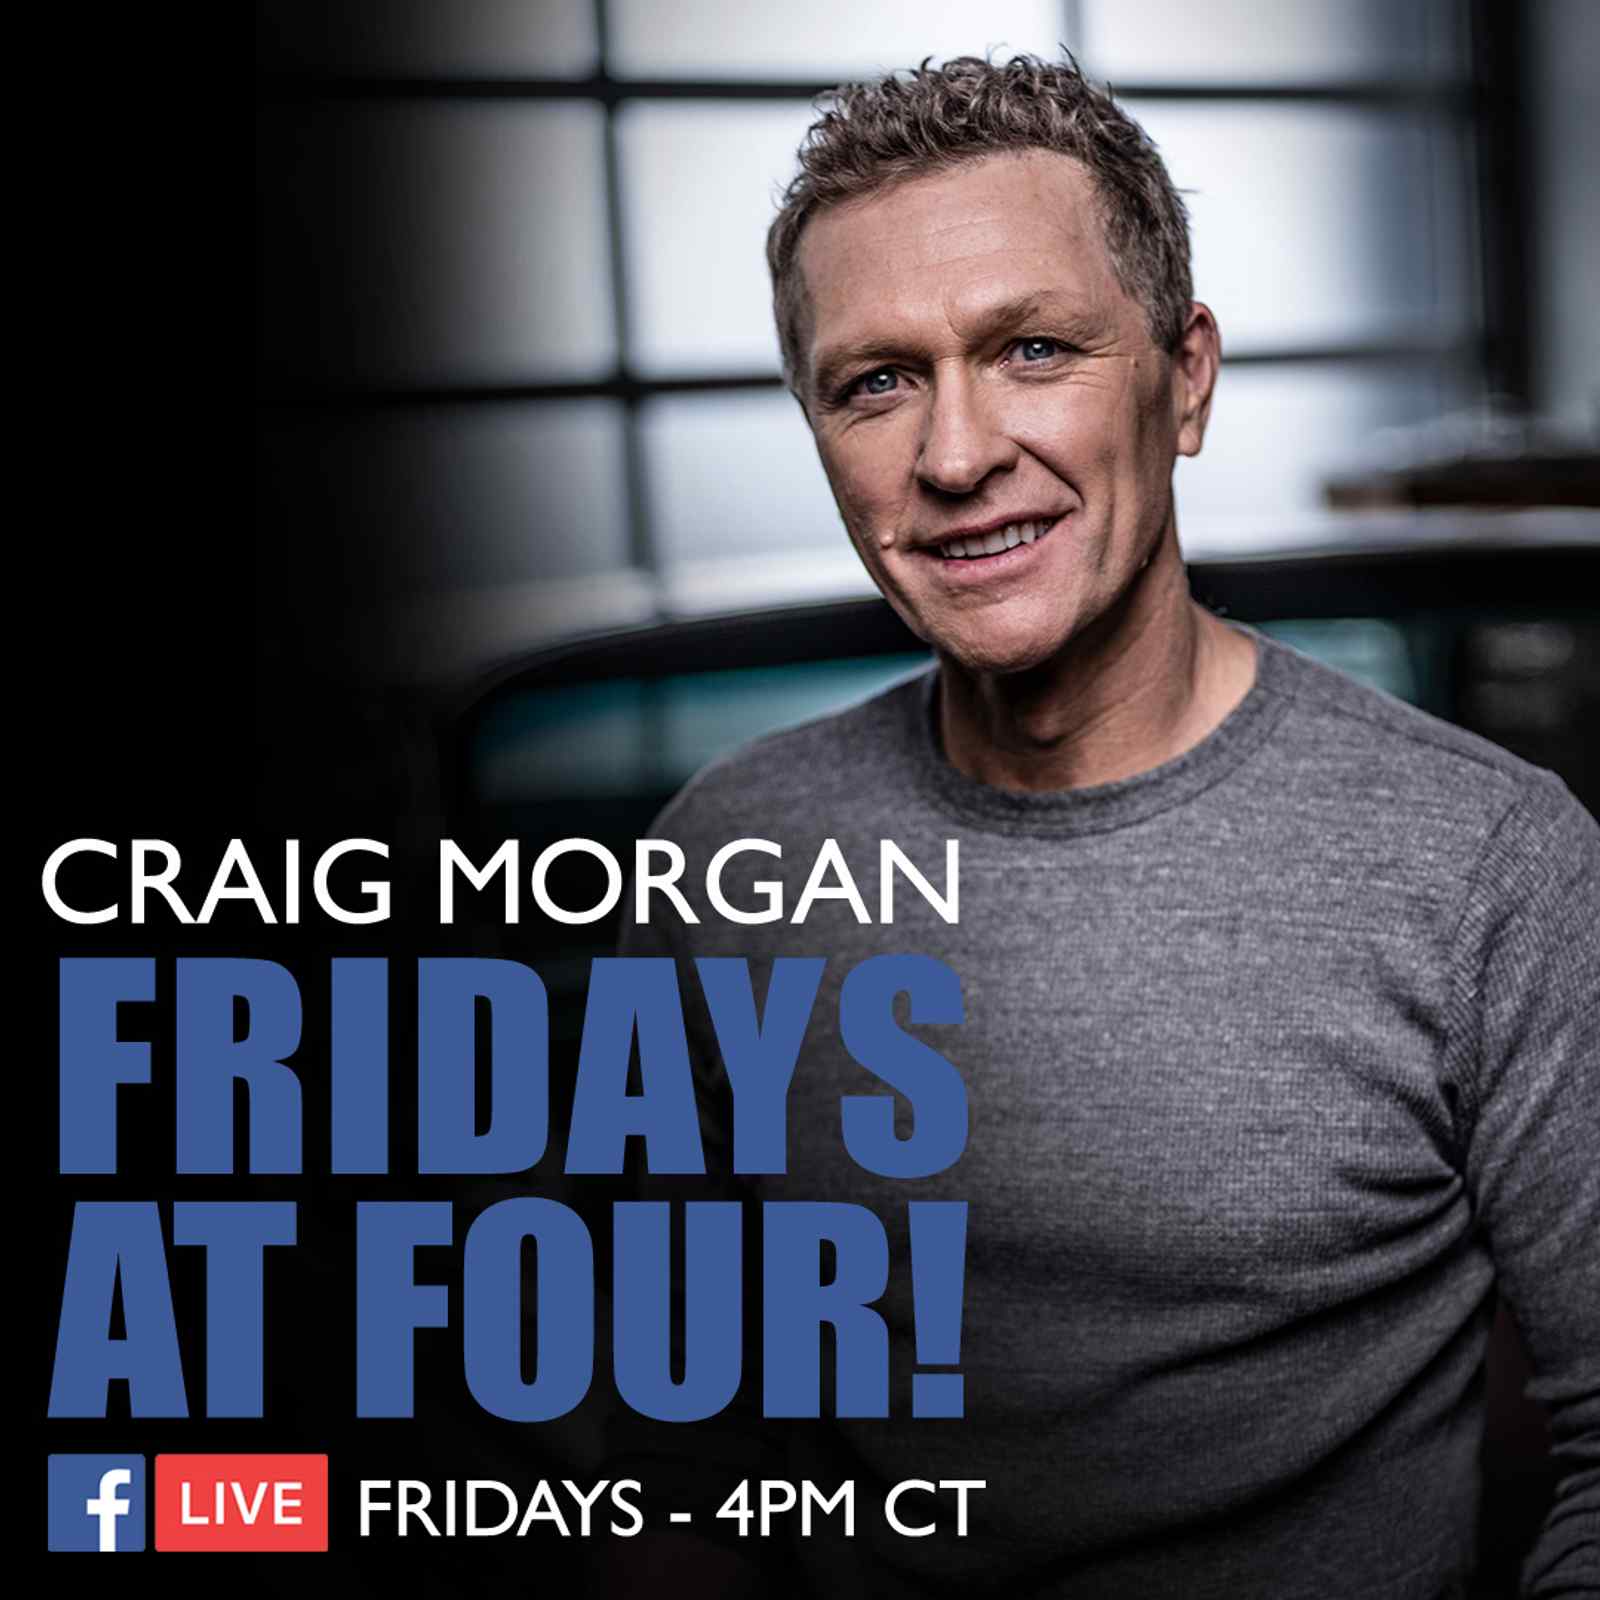 Fridays at Four: Craig Morgan with guest Lainey Wilson